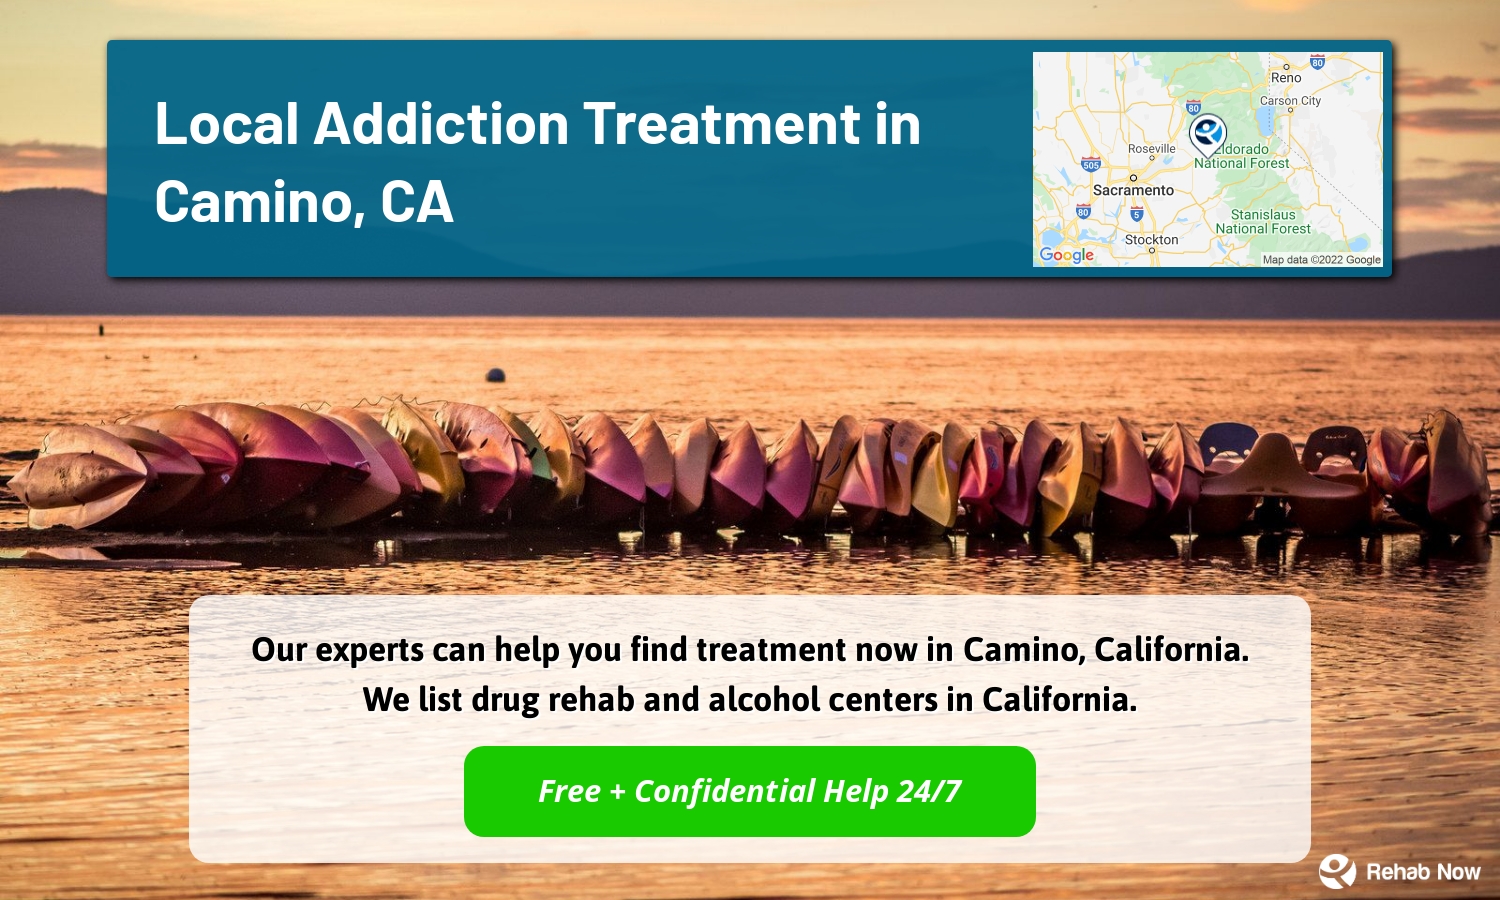 Our experts can help you find treatment now in Camino, California. We list drug rehab and alcohol centers in California.